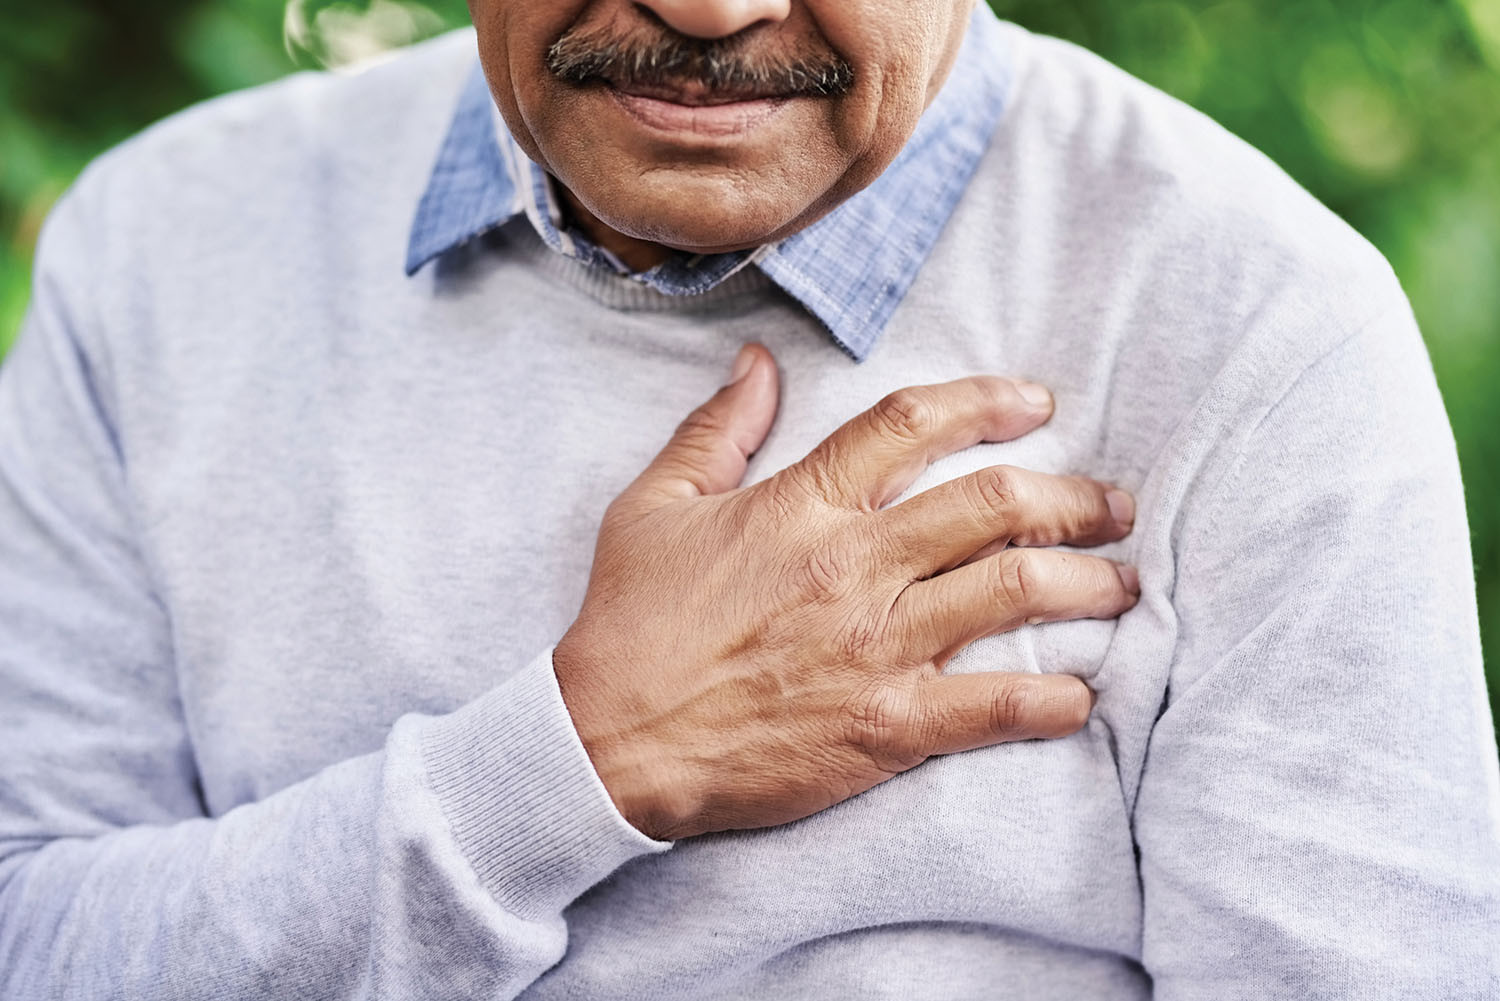 photo of an older man clutching his chest experiencing pain